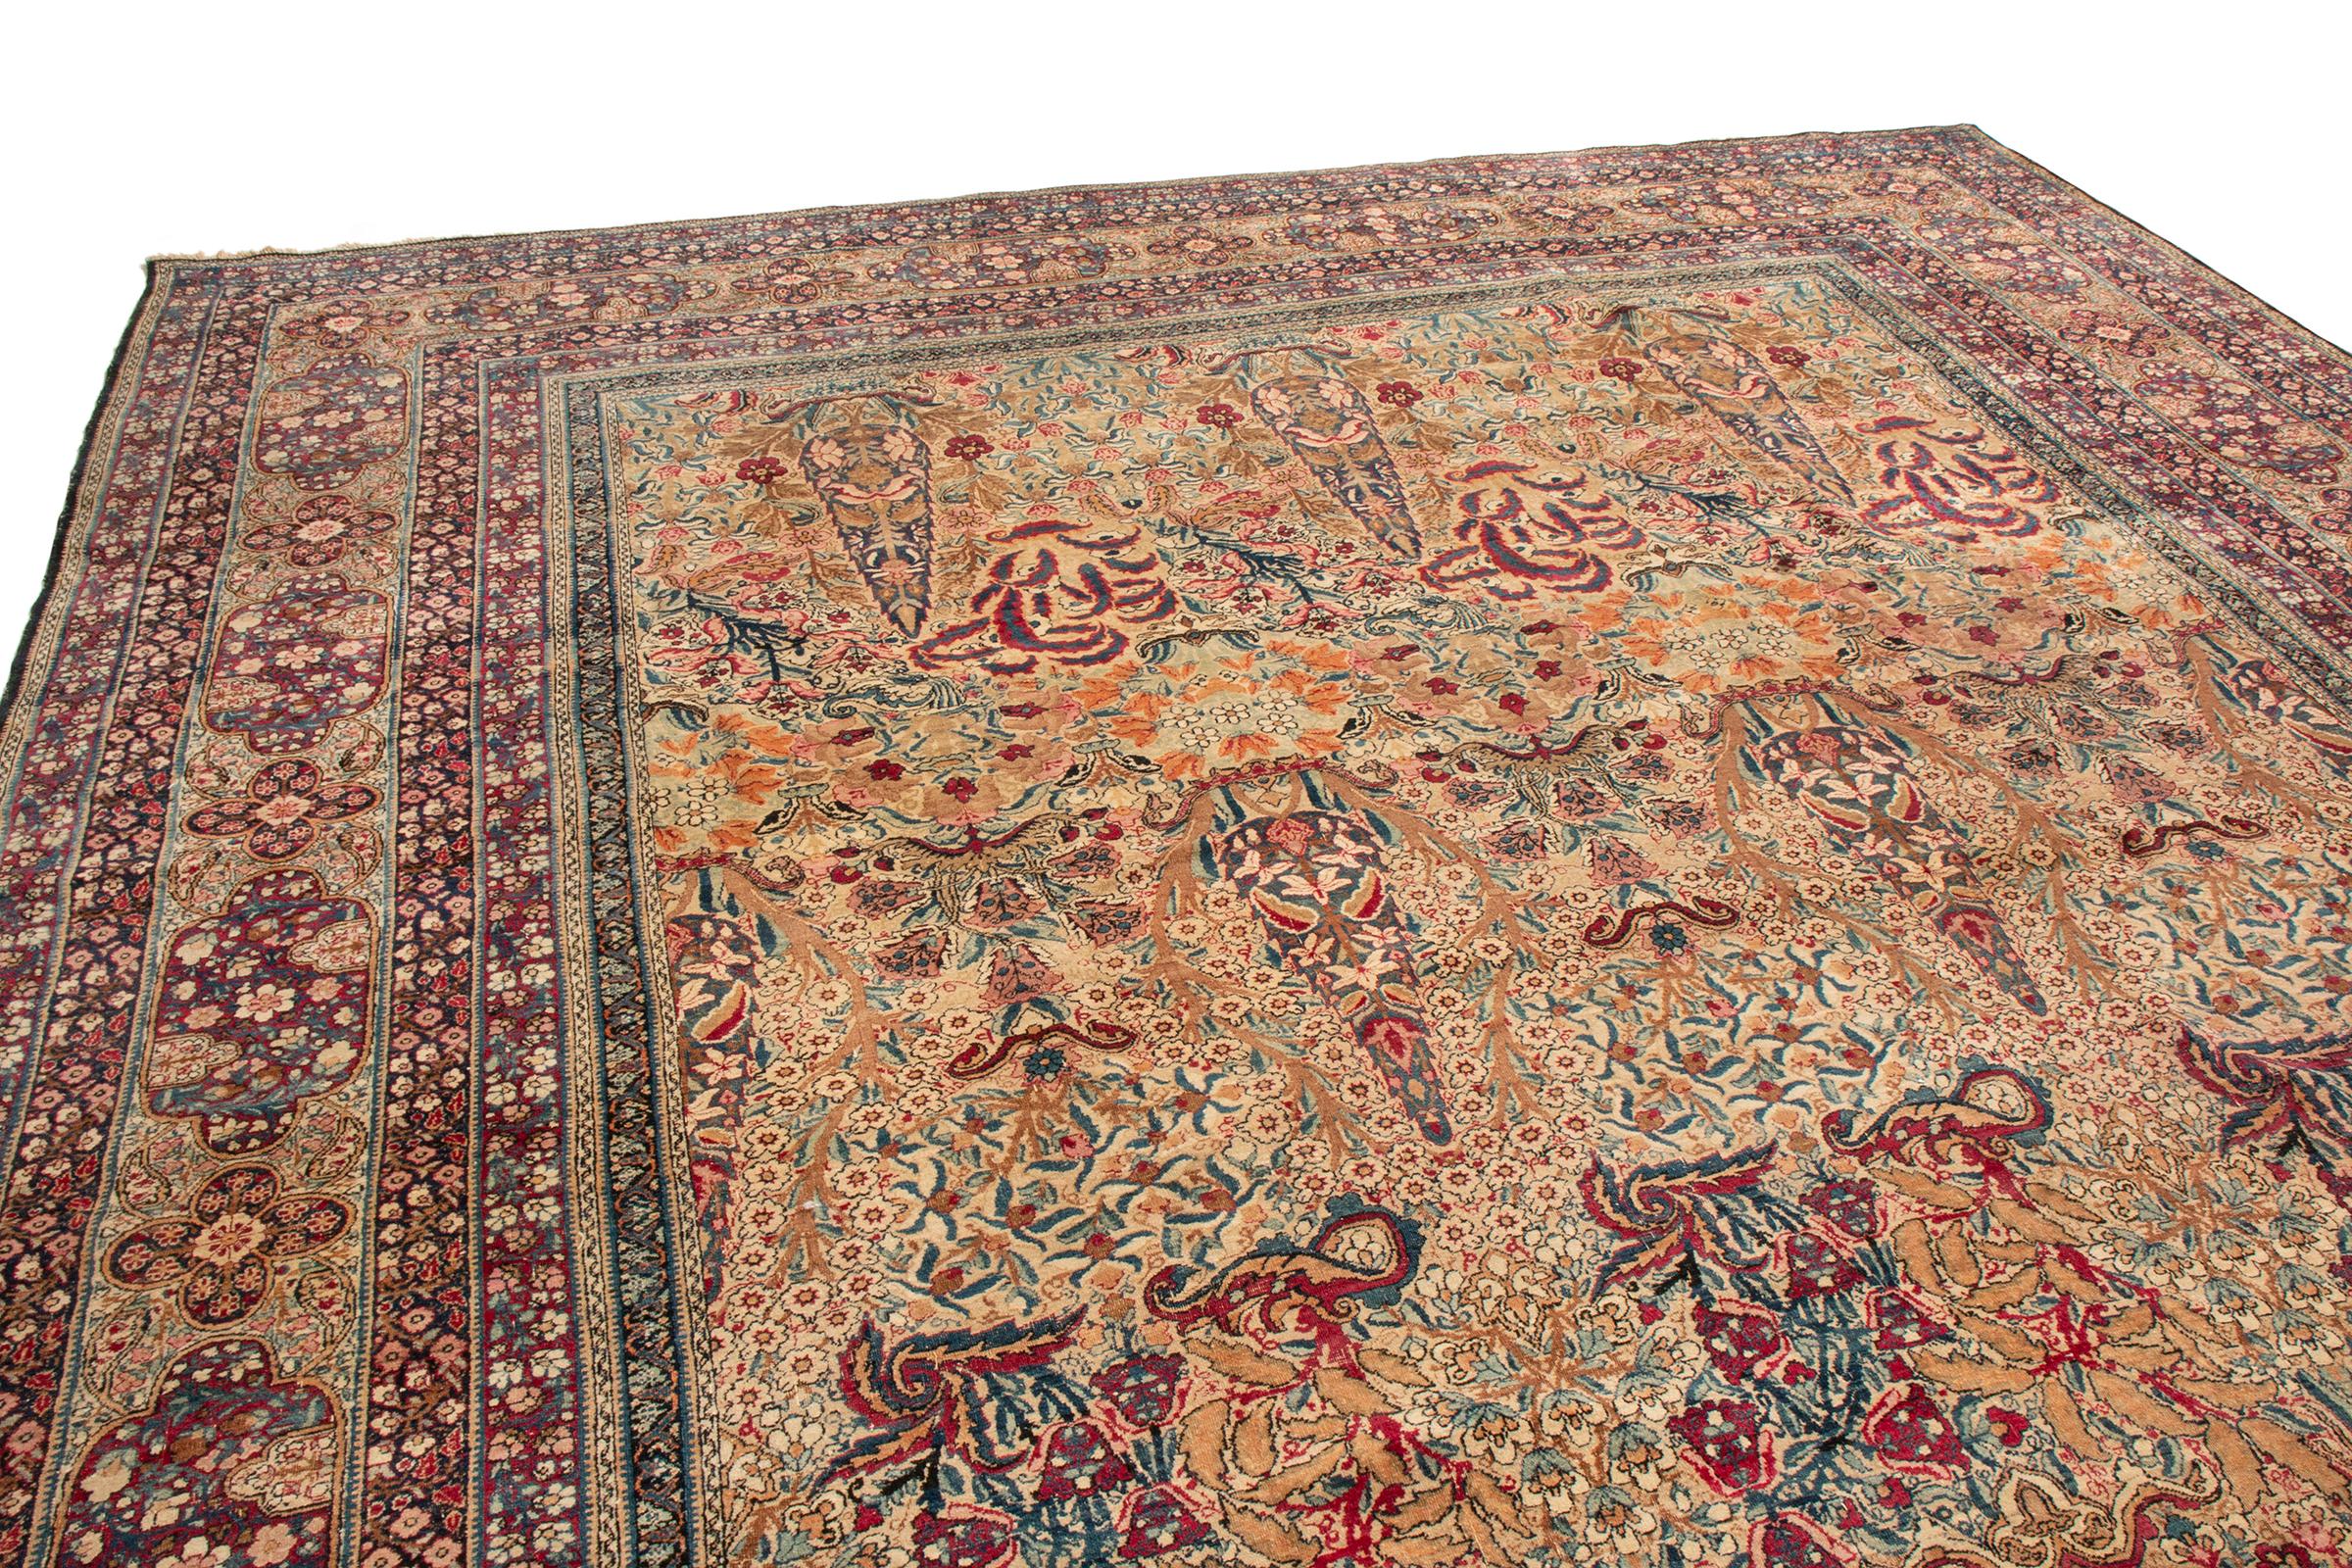 This 9×15 antique Persian rug is a rare signature piece from the works of Aboul Ghasem Kermani. Hand-knotted in wool circa 1890-1900, this piece was featured in the National Museum of Iran in Tehran, and is an extremely collectible and import piece